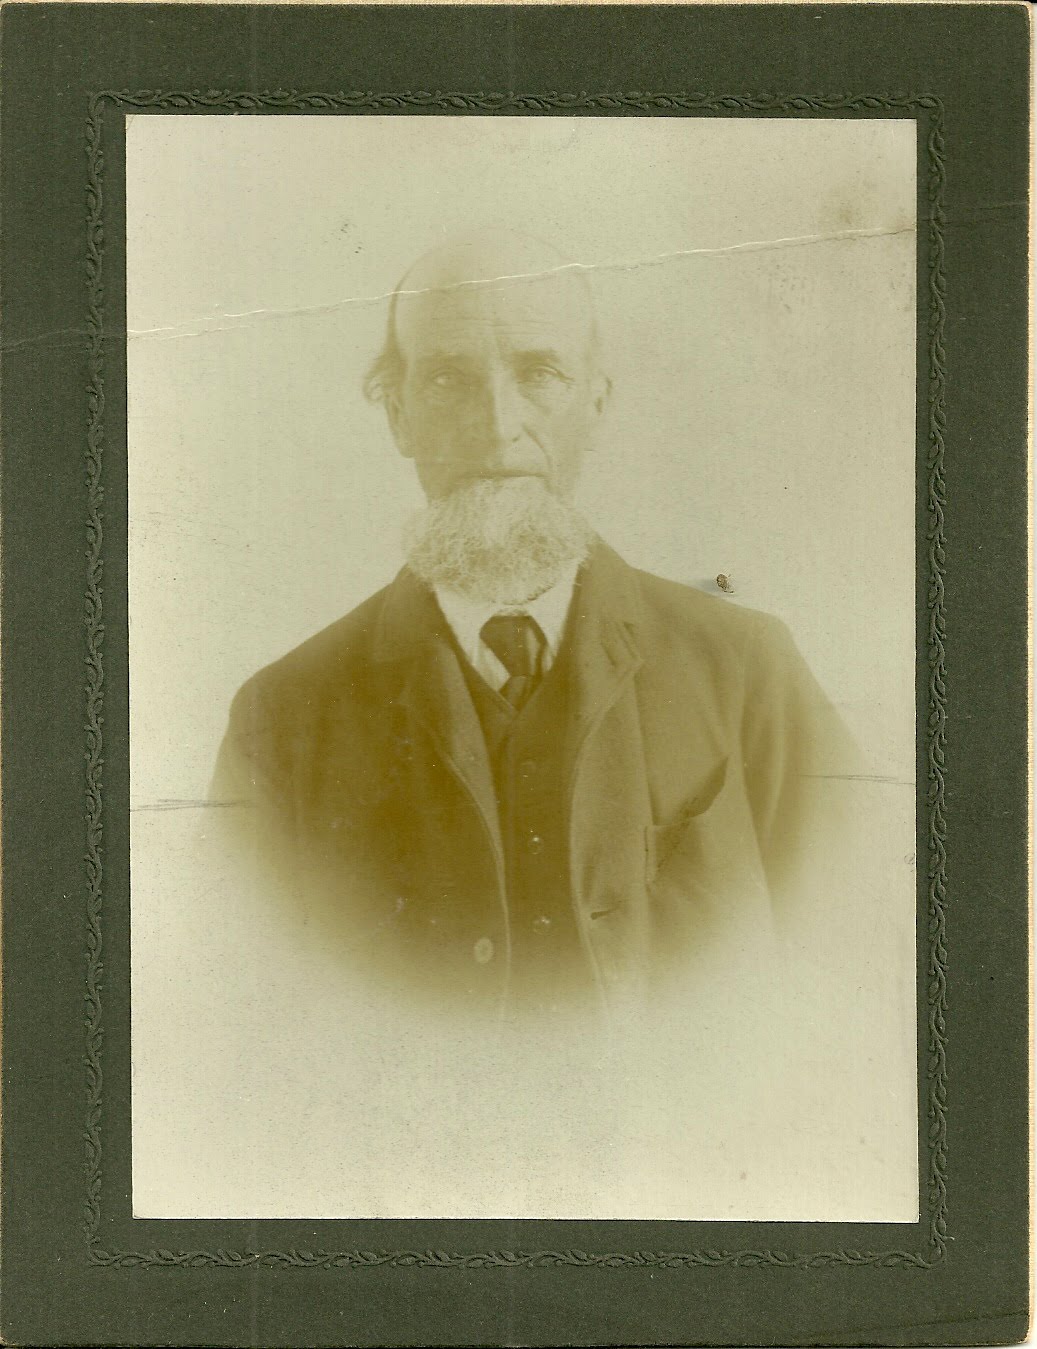 I'm assuming that this is a photograph of an elderly Jotham Lincoln Sprague 